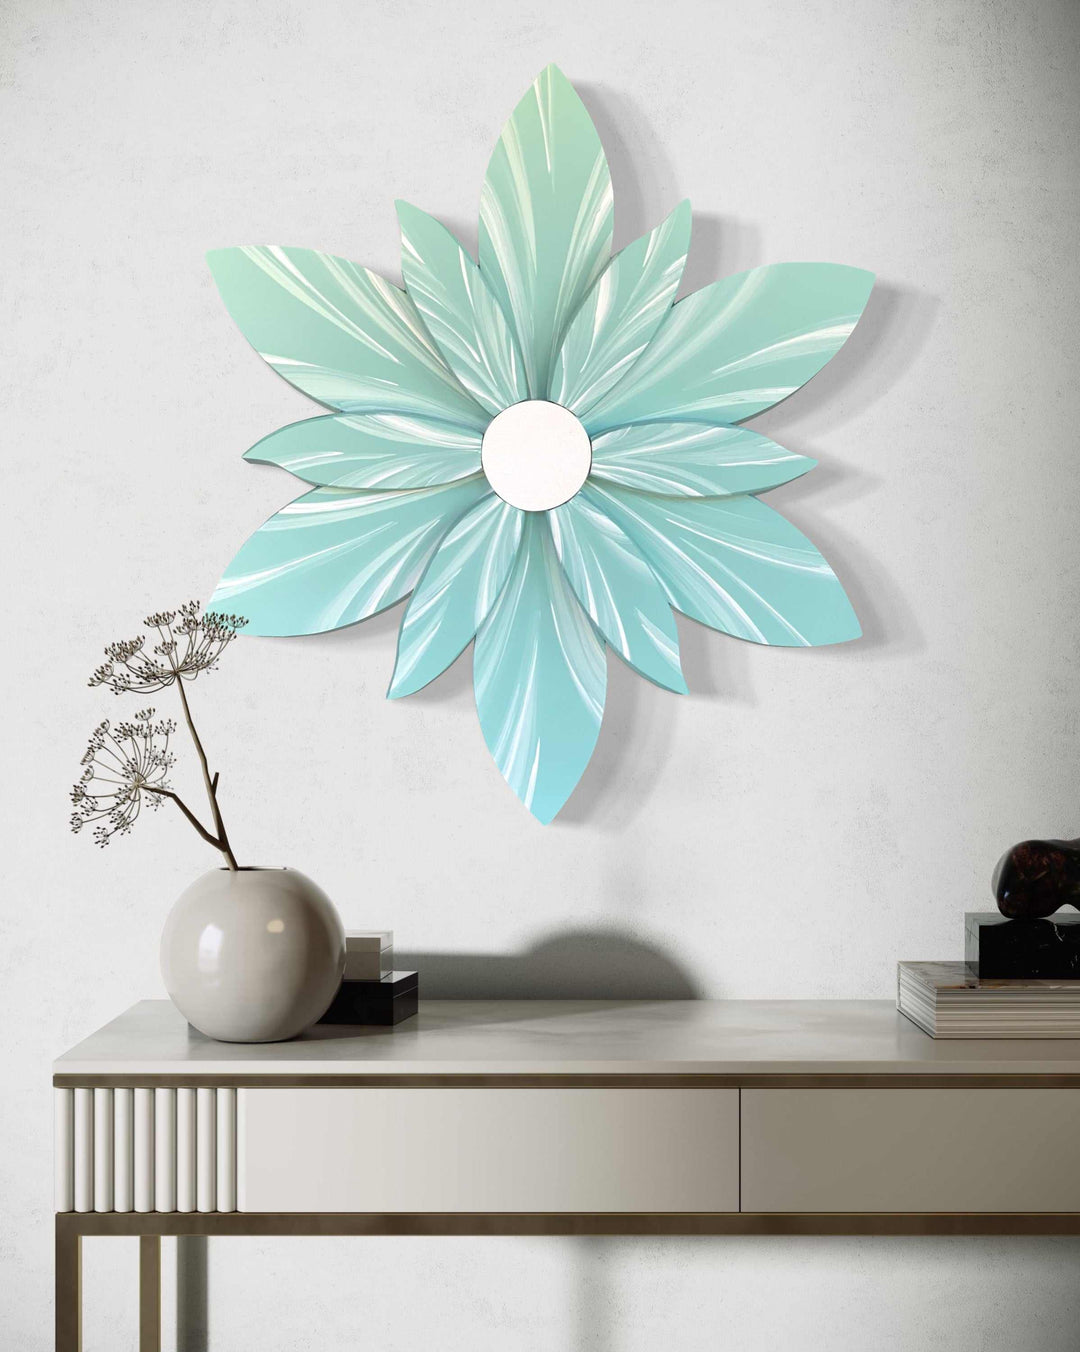 Handcrafted Curled Top Petal Flower - Unique Home Decor | Wood n Wares